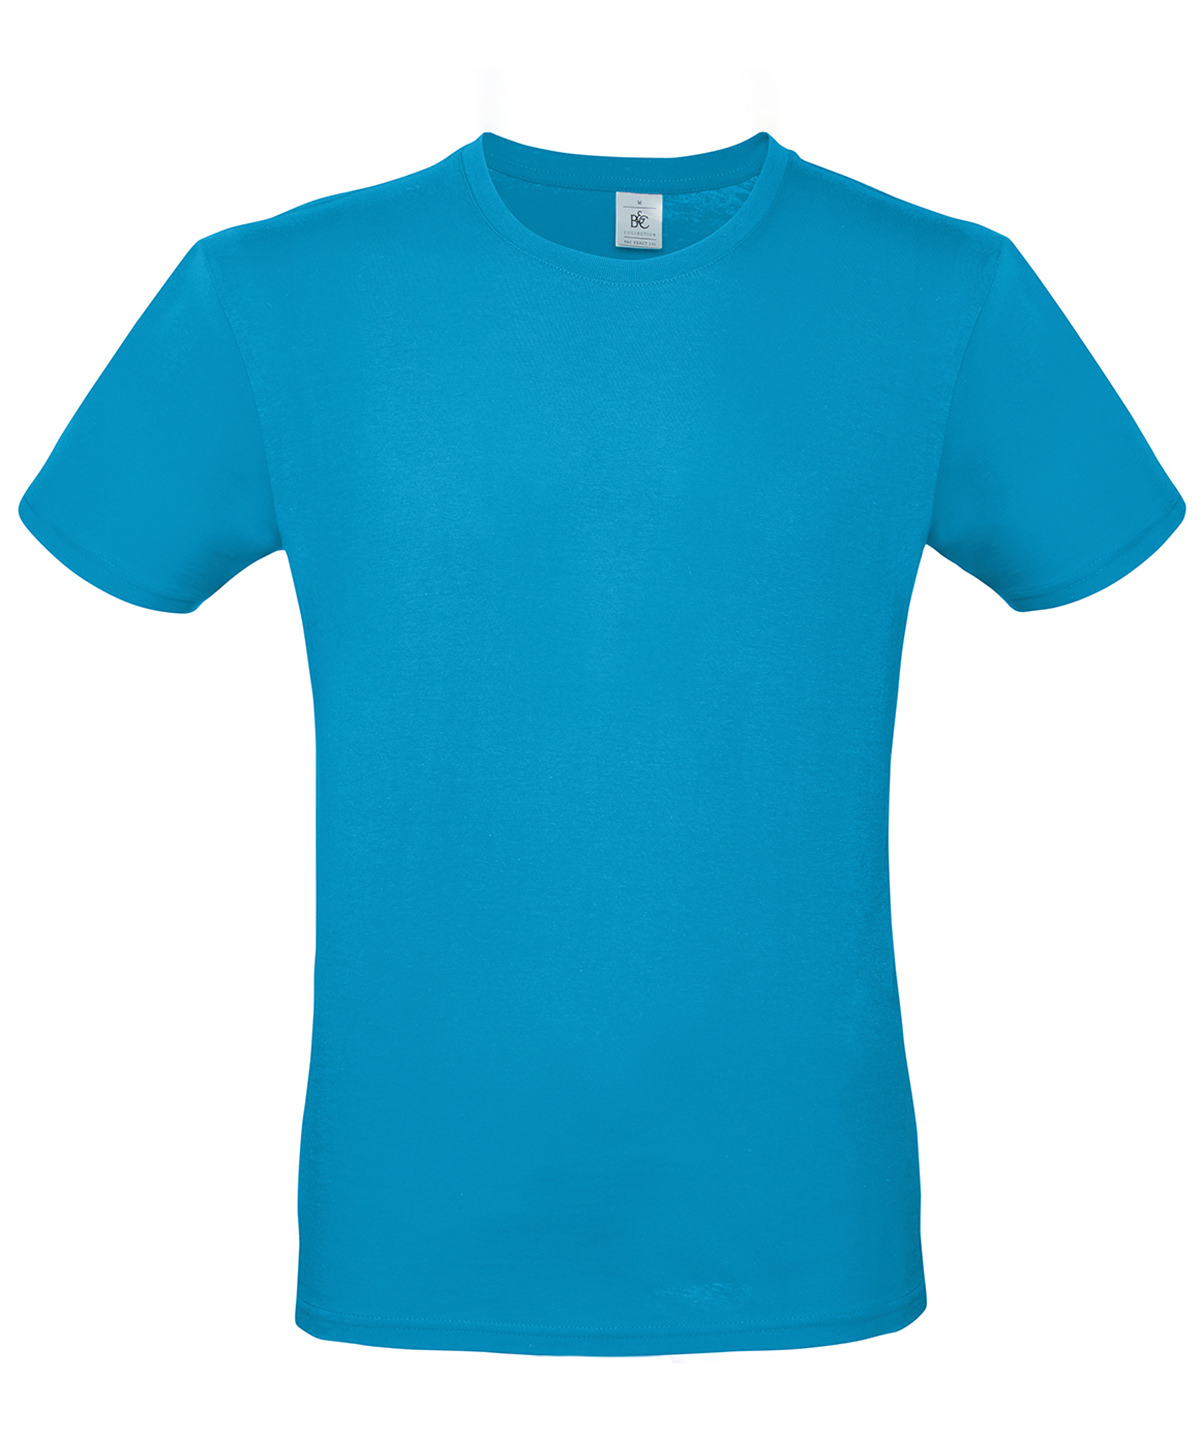 T-shirt in blue front view